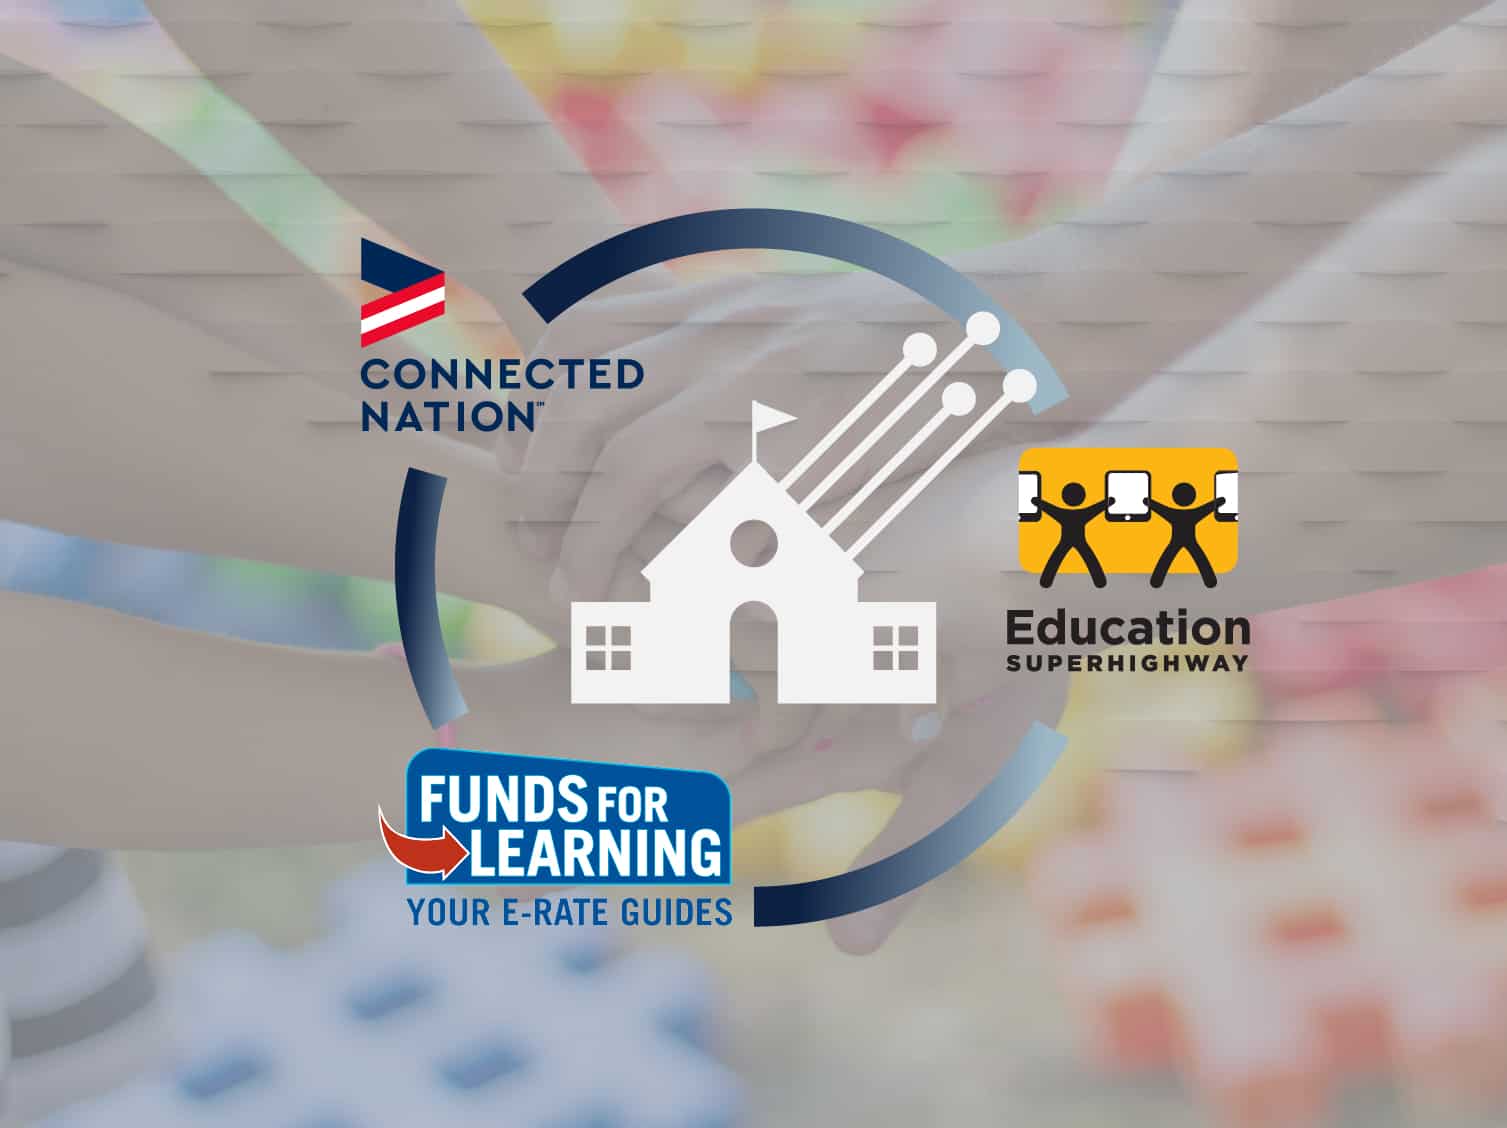 Graphic of hands coming together in the background with logos of EducationSuperhighway, Connected Nation, and Funds for Learning in the foreground